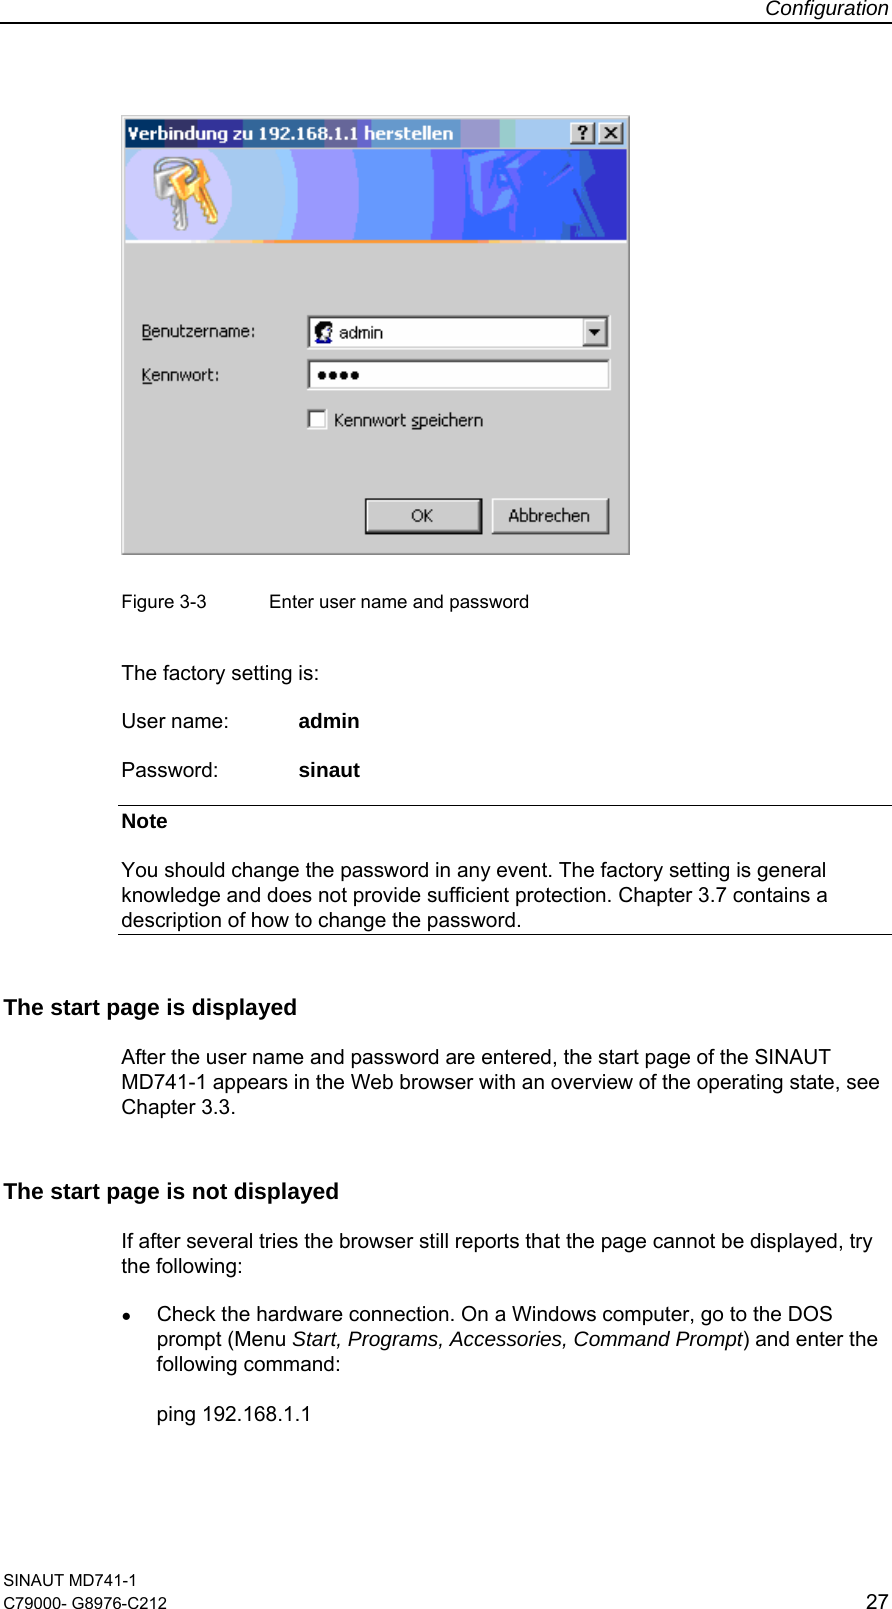 Configuration SINAUT MD741-1 C79000- G8976-C212  27     Figure 3-3  Enter user name and password  The factory setting is: User name:  admin Password:   sinaut Note You should change the password in any event. The factory setting is general knowledge and does not provide sufficient protection. Chapter 3.7 contains a description of how to change the password. The start page is displayed After the user name and password are entered, the start page of the SINAUT MD741-1 appears in the Web browser with an overview of the operating state, see Chapter 3.3. The start page is not displayed If after several tries the browser still reports that the page cannot be displayed, try the following: ● Check the hardware connection. On a Windows computer, go to the DOS prompt (Menu Start, Programs, Accessories, Command Prompt) and enter the following command:  ping 192.168.1.1 